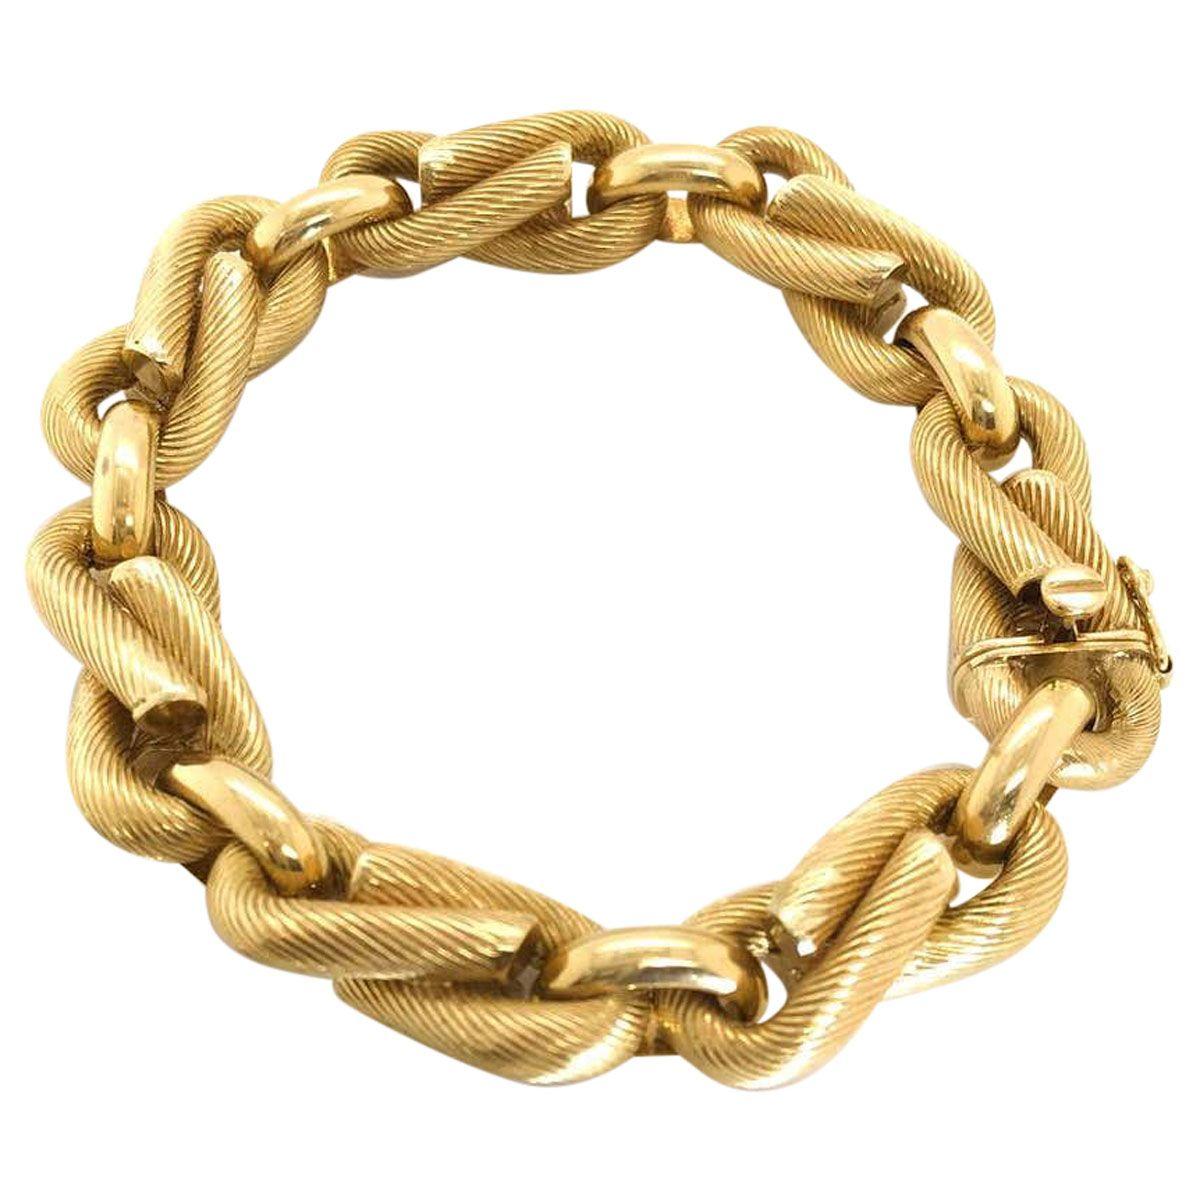 This chunky look 18k yellow gold bracelet has such great style and has a very unusual link. The ribbed gold is fashioned into a figure 8 or infinity link, the ribbing gives the gold a soft shine that is not too overstated but bold enough to be